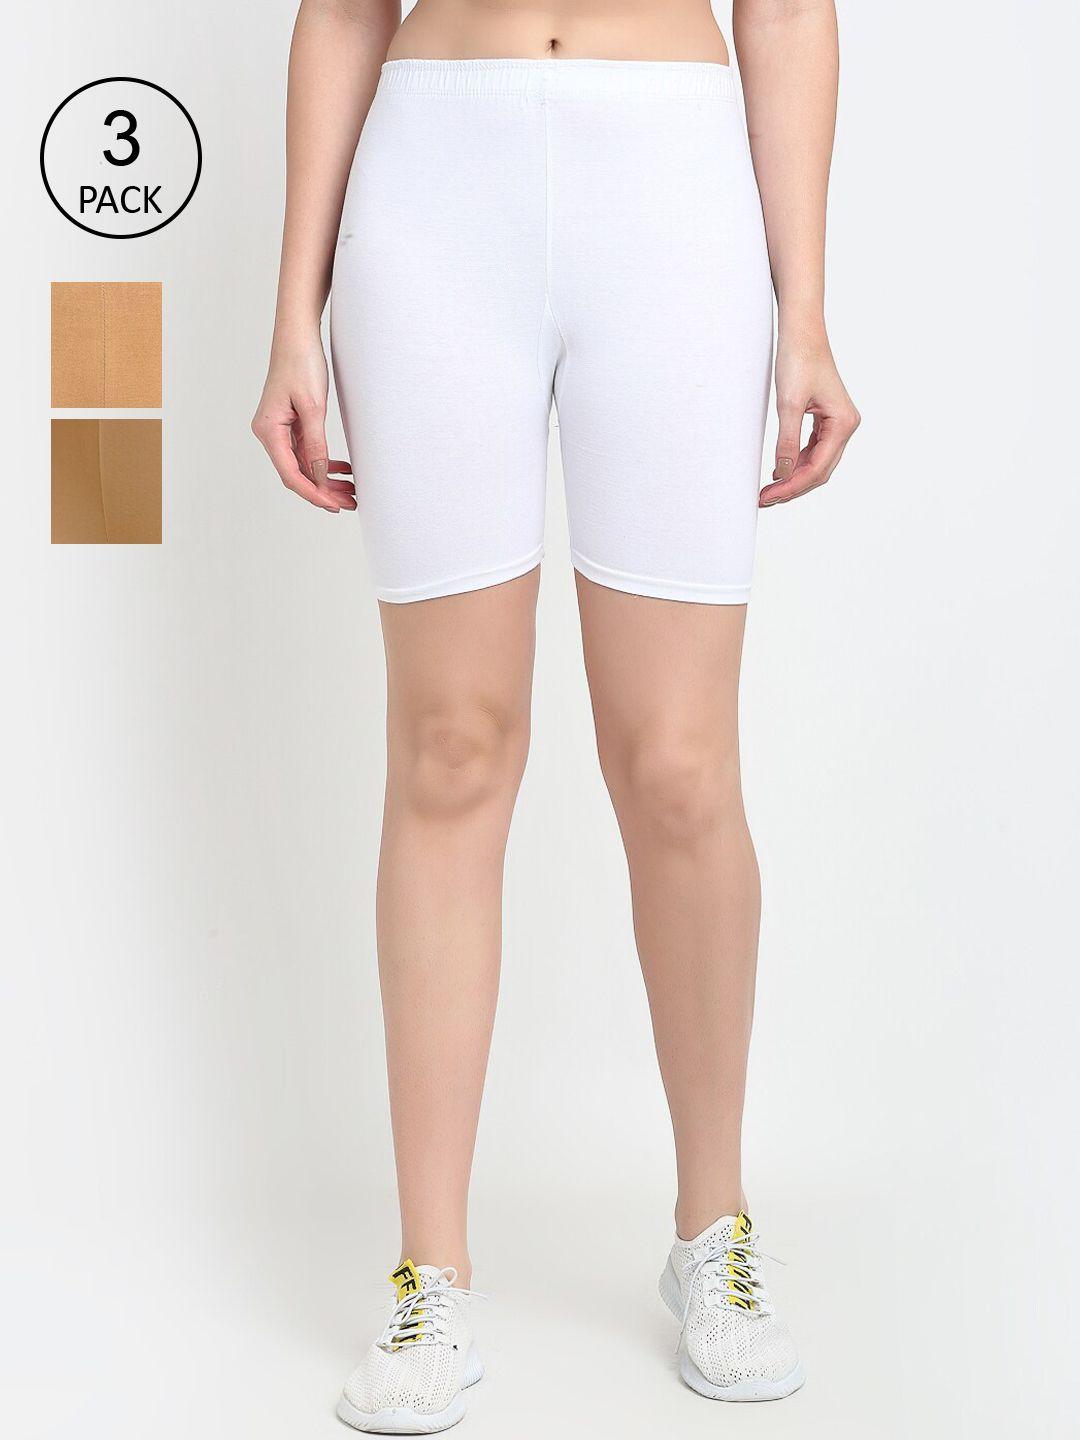 gracit-pack-of-3women-white-cycling-sports-shorts